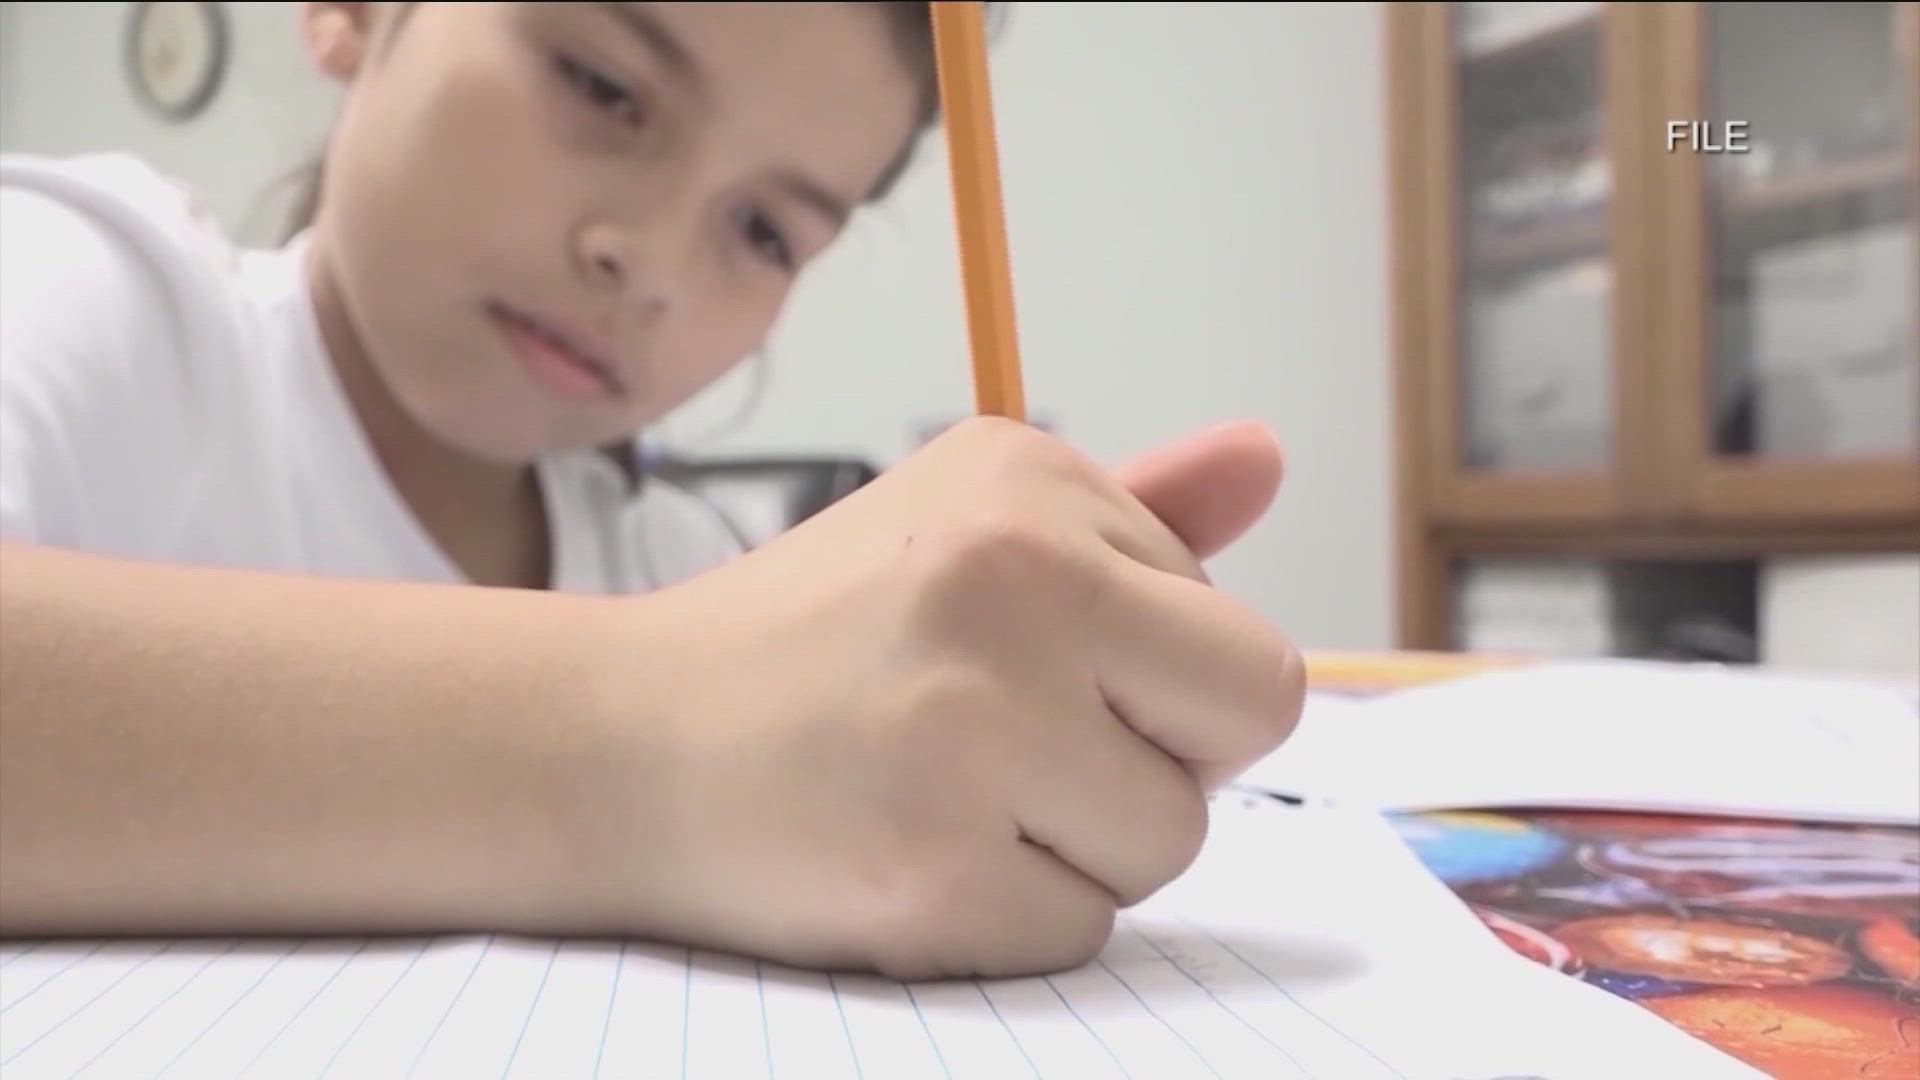 Raise Your Hand Texas, a public policy group, is pushing for lawmakers to file a bill to make changes to the STAAR test. Here's what they want to see.